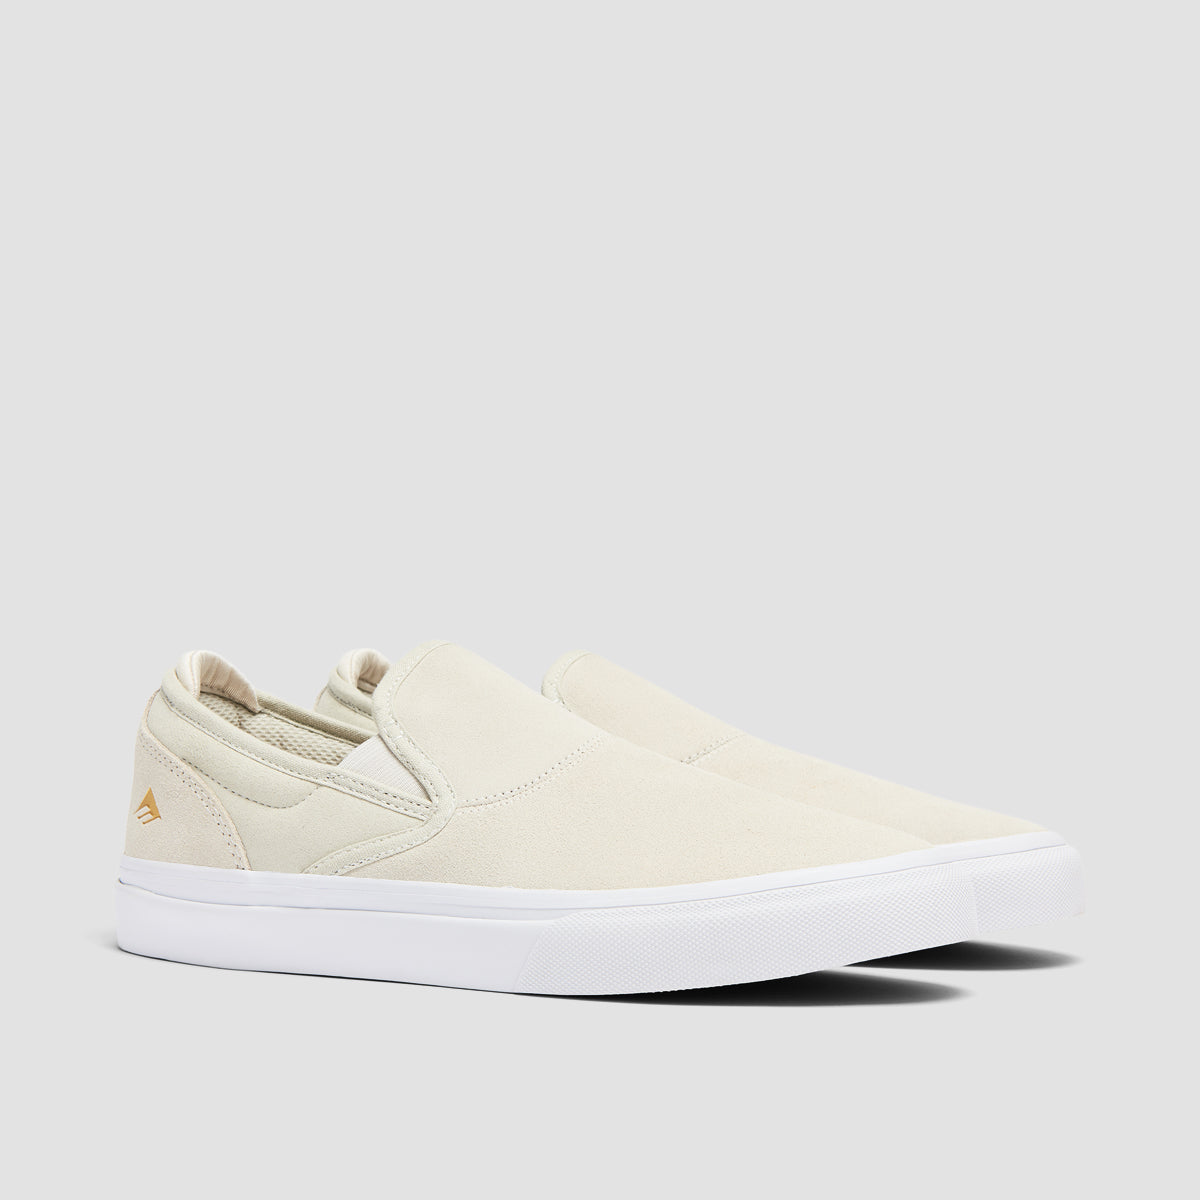 Emerica Wino G6 Slip-On X This Is Skateboarding Shoes - White